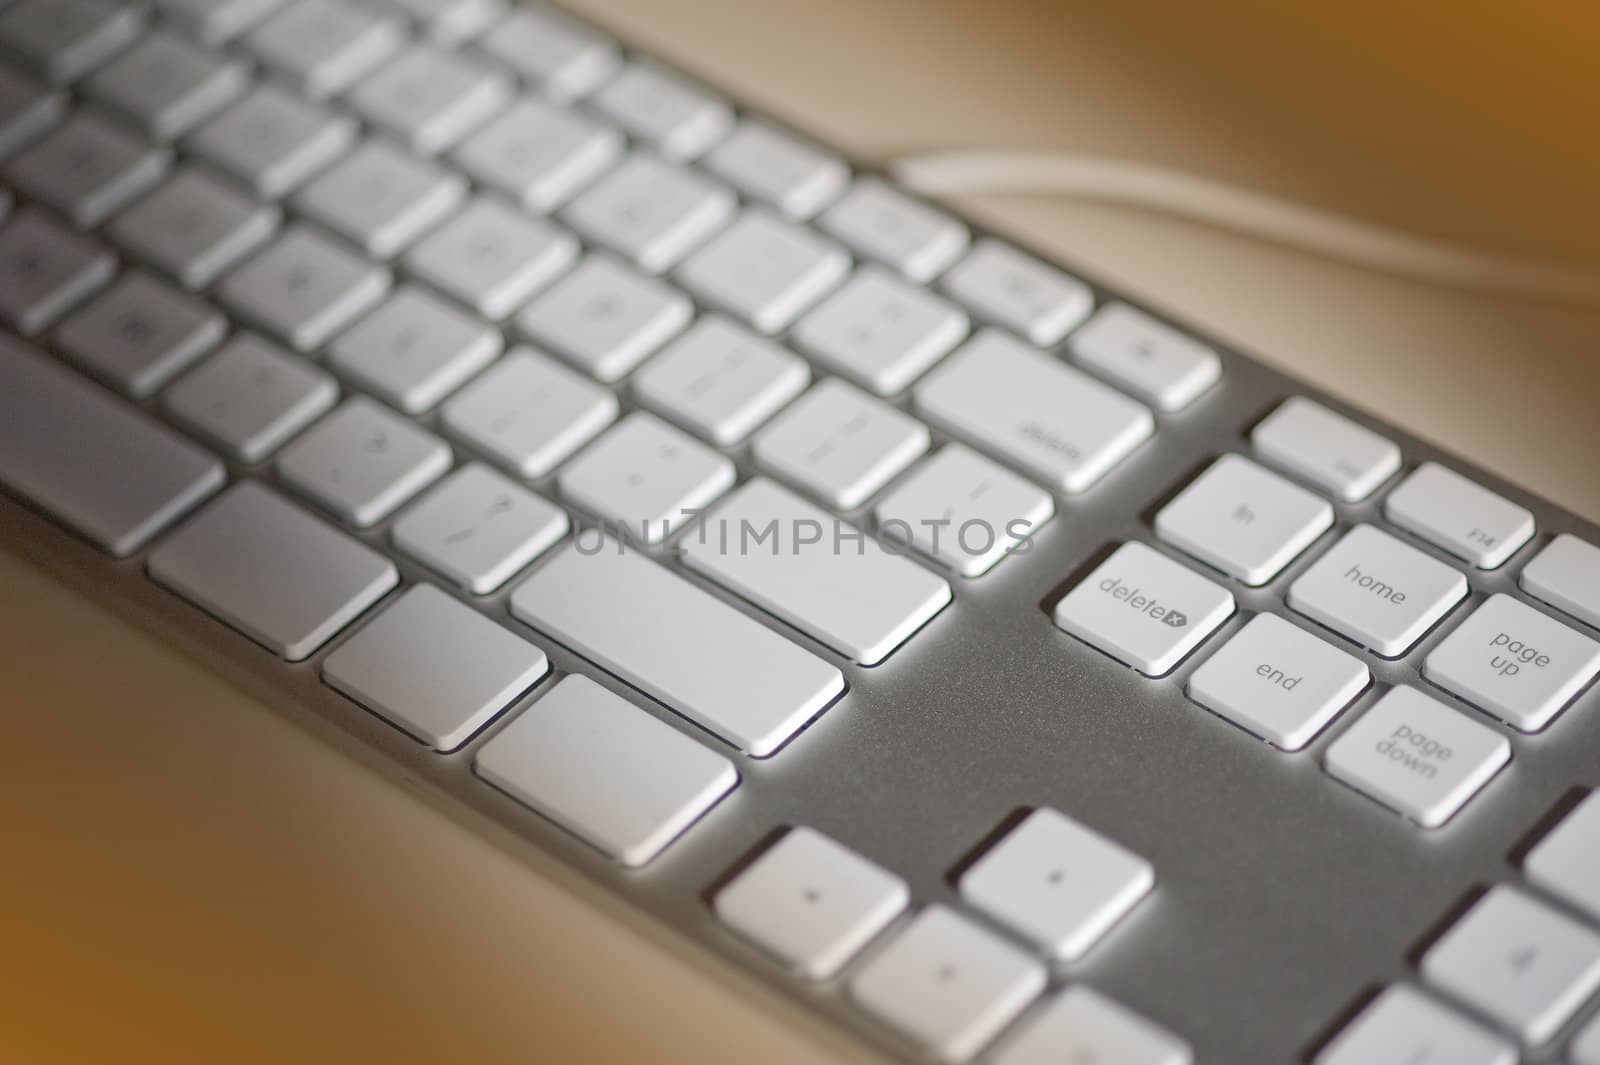 Keyboard in brown with limited depth of field